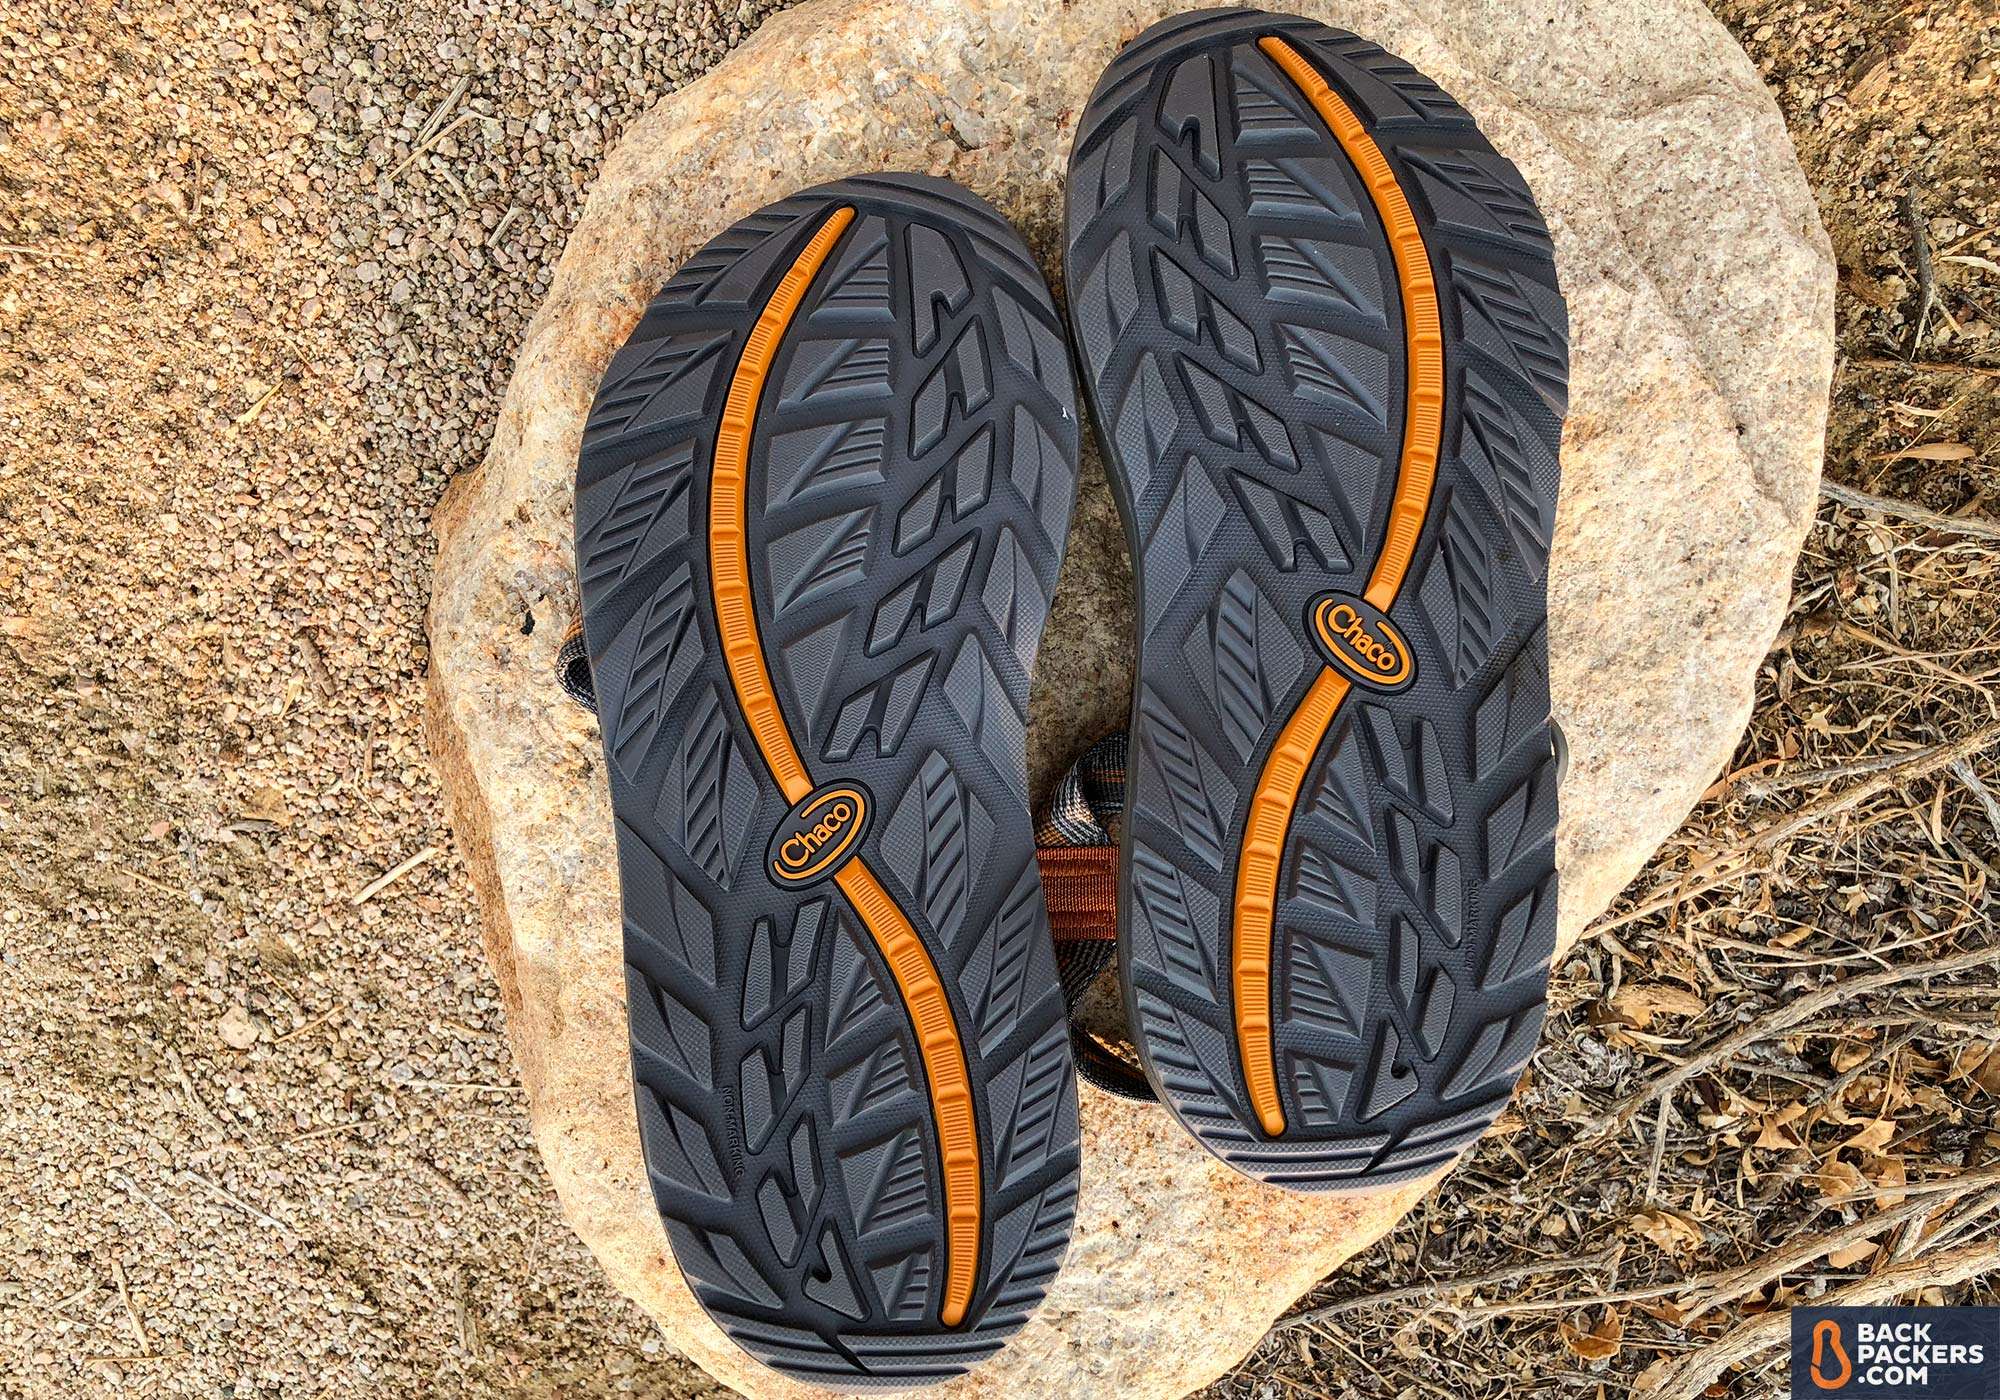 chacos with vibram soles